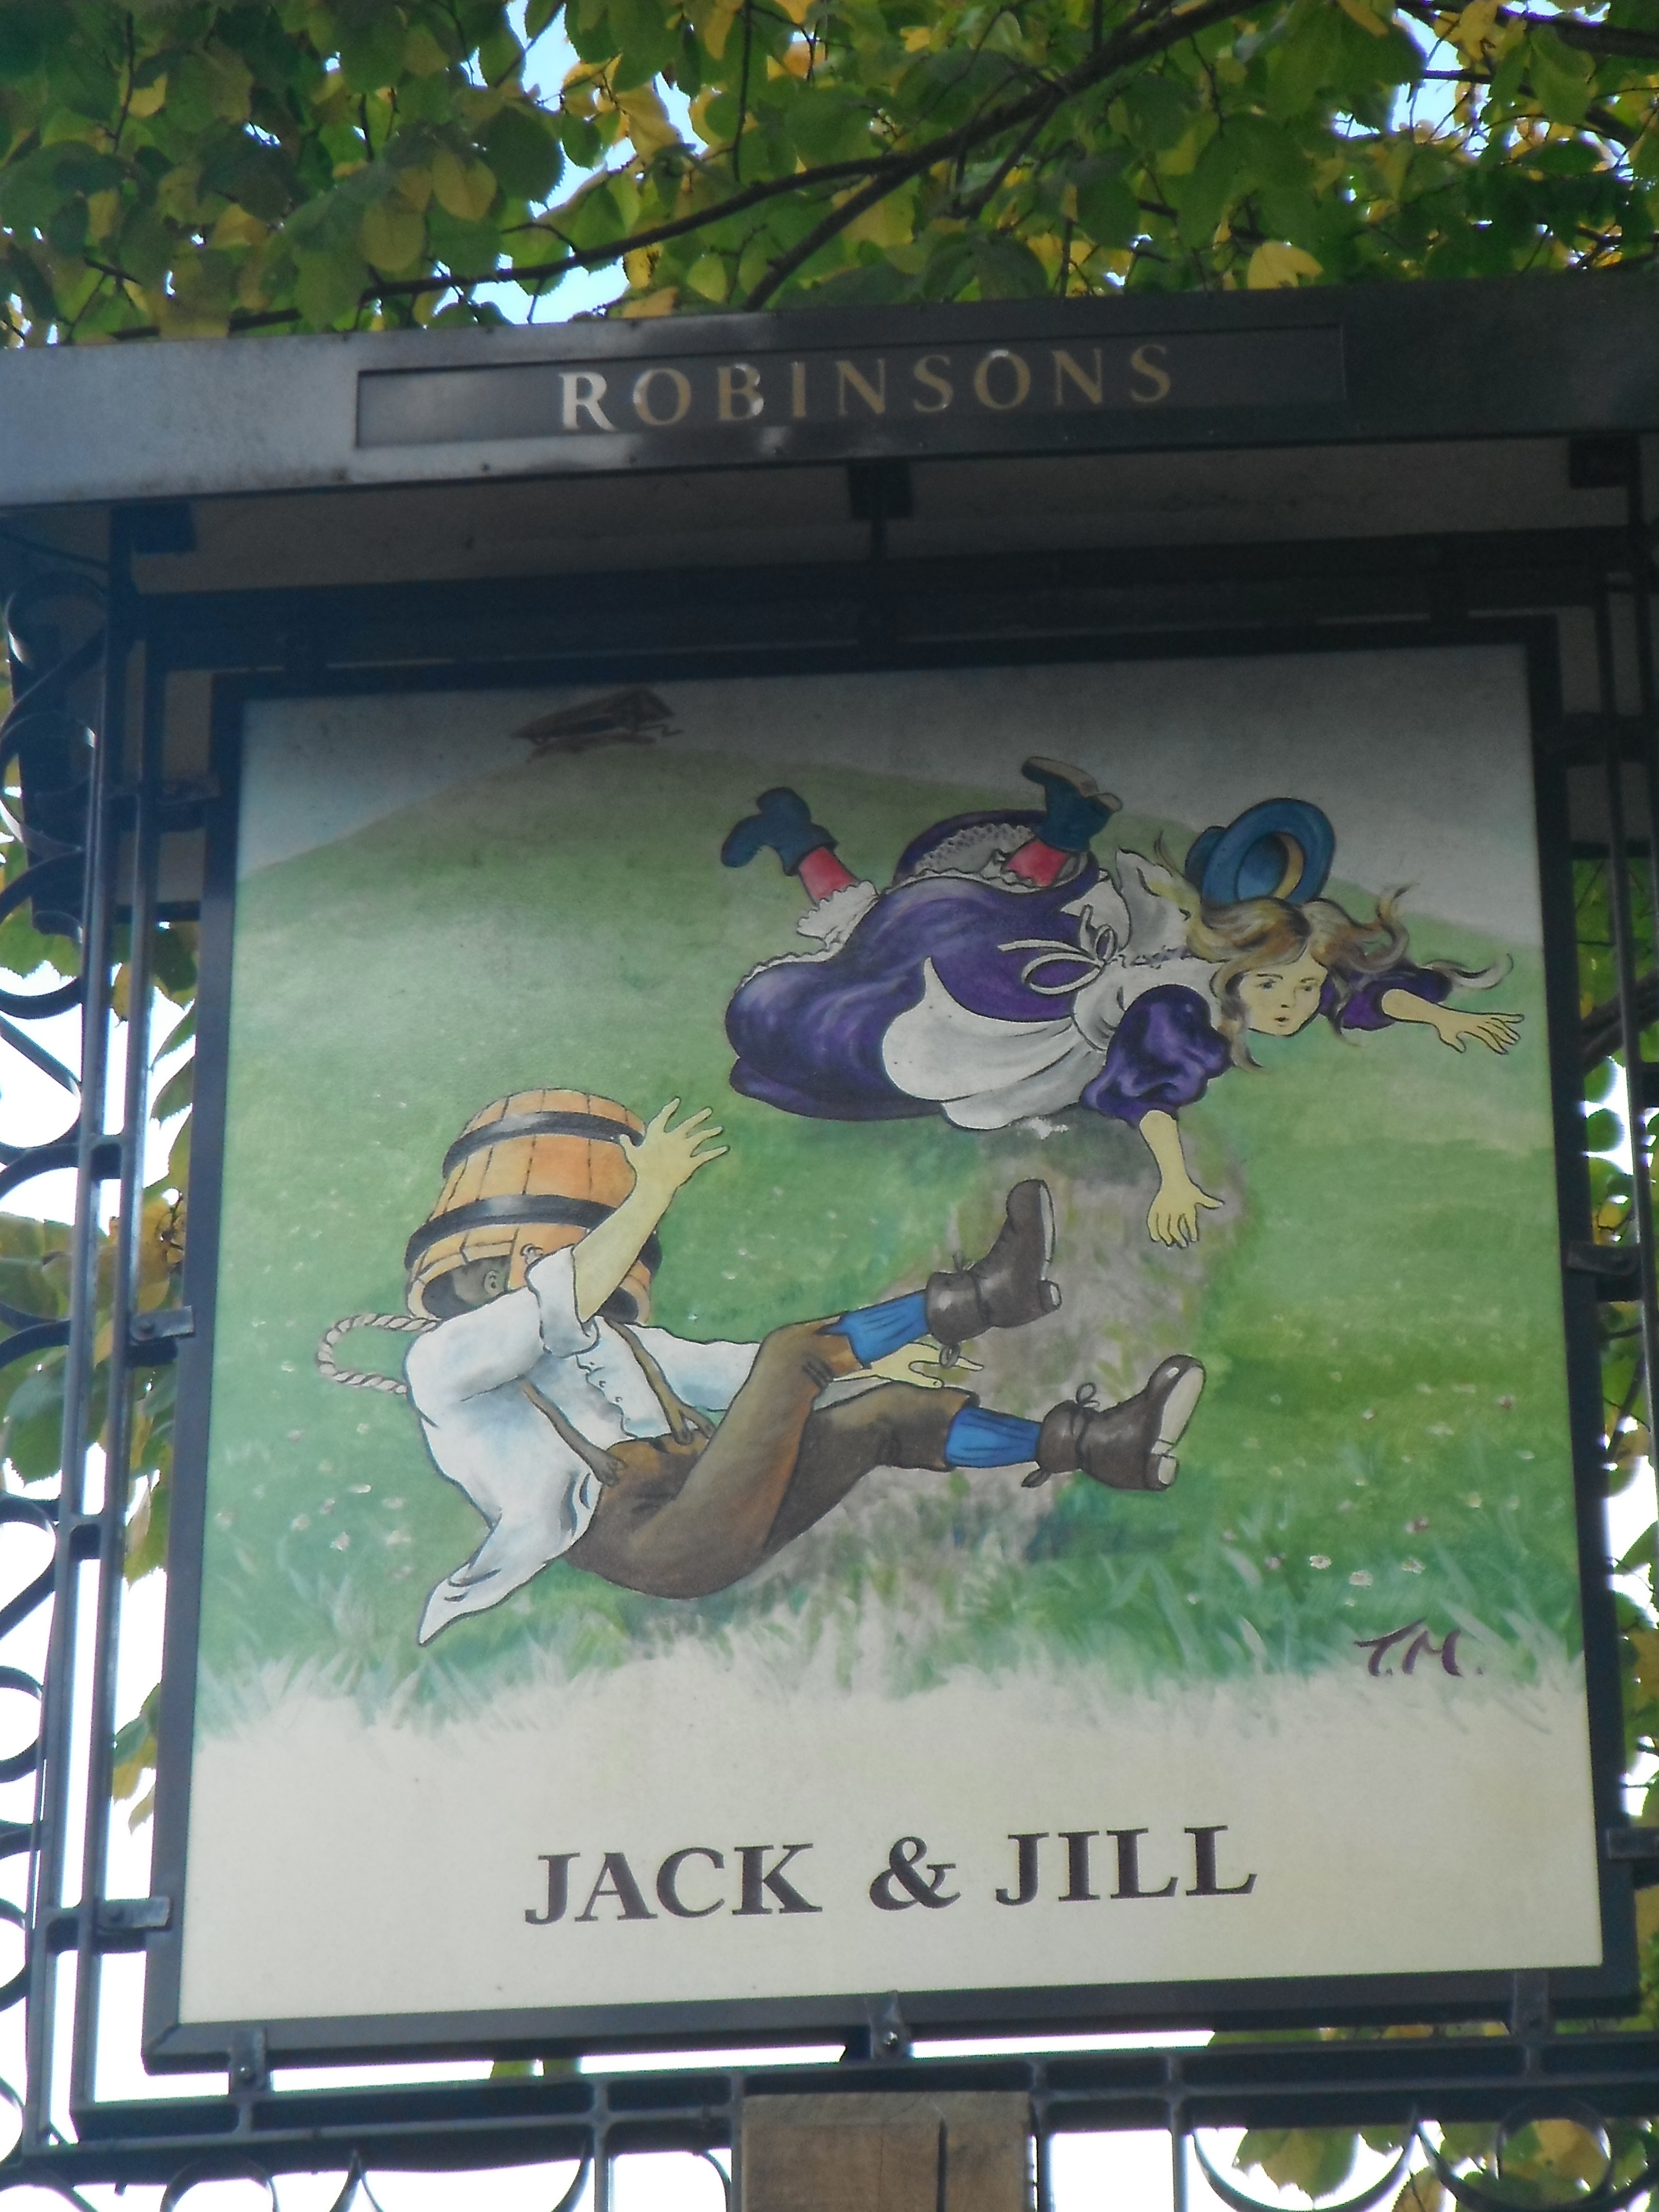 Photo taken by me - Pub Sign - The Jack And Jill Brinnington Stockport Cheshire